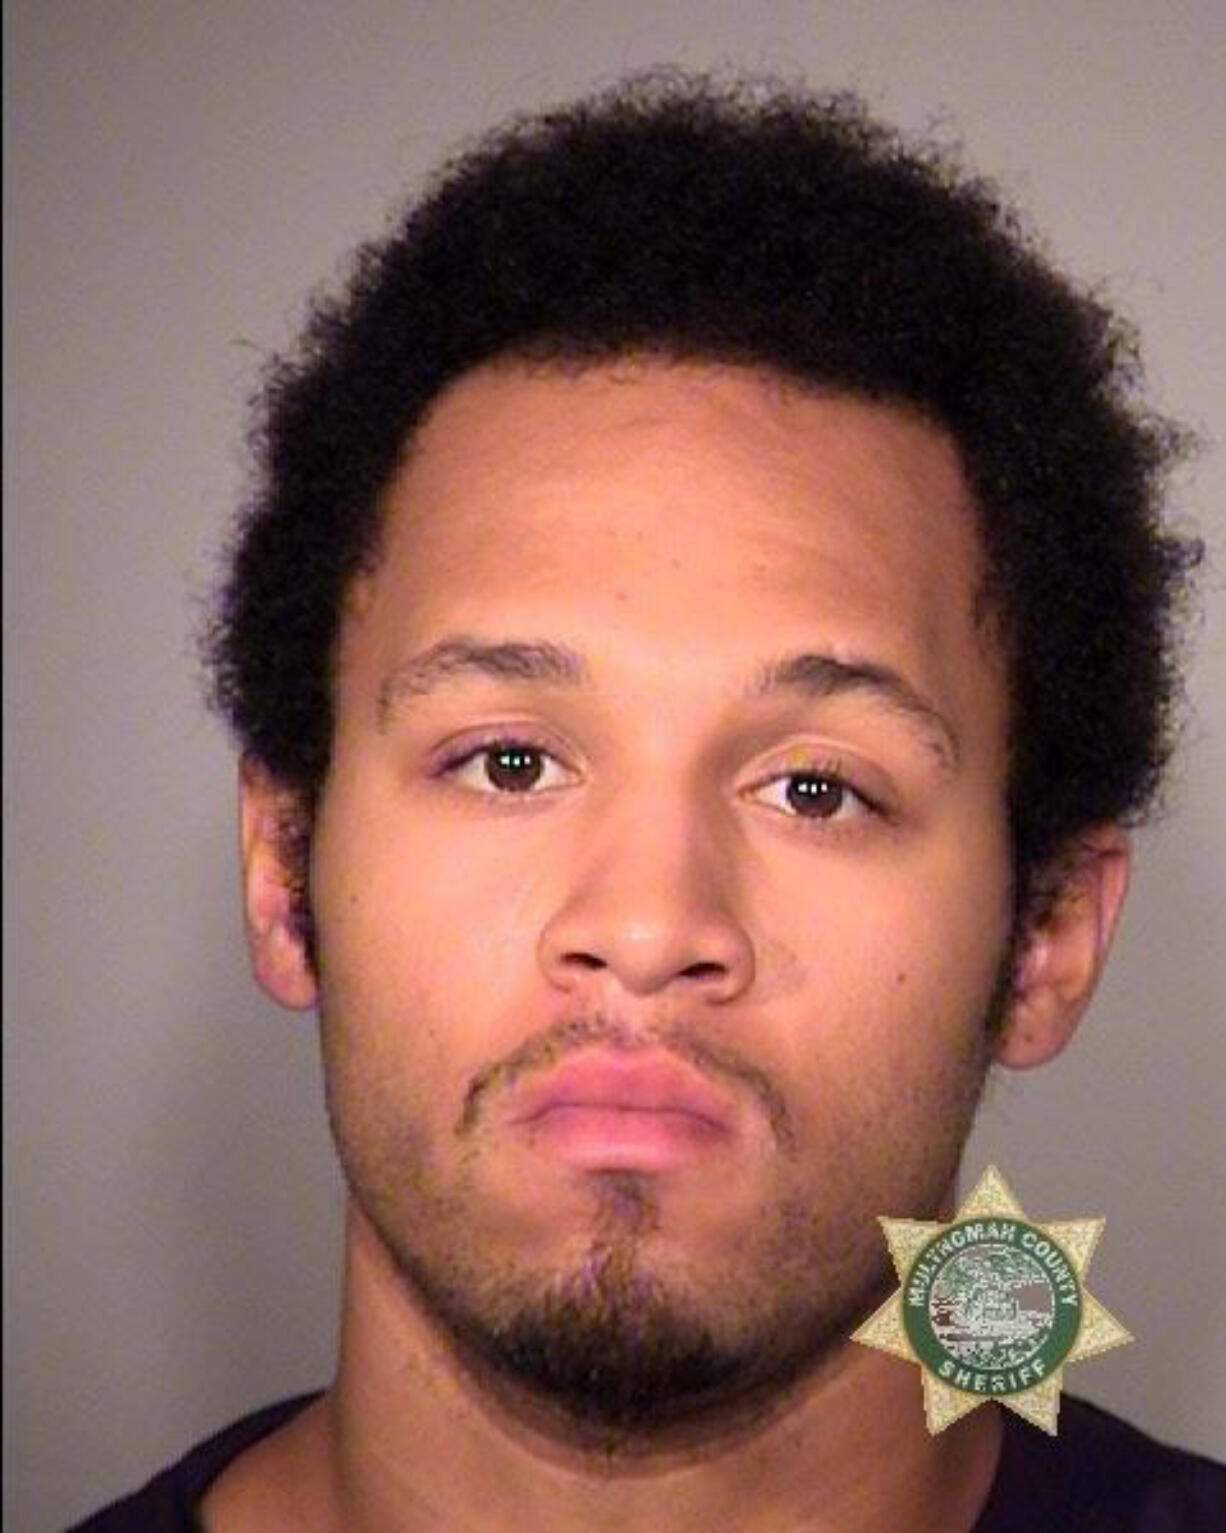 Andrew R. Hayes, 24 ,of Portland was arrested July 25 in Multnomah County on suspicion of first-degree manslaughter of a 1-year-old girl in Vancouver. He pleaded not guilty to the charge today.